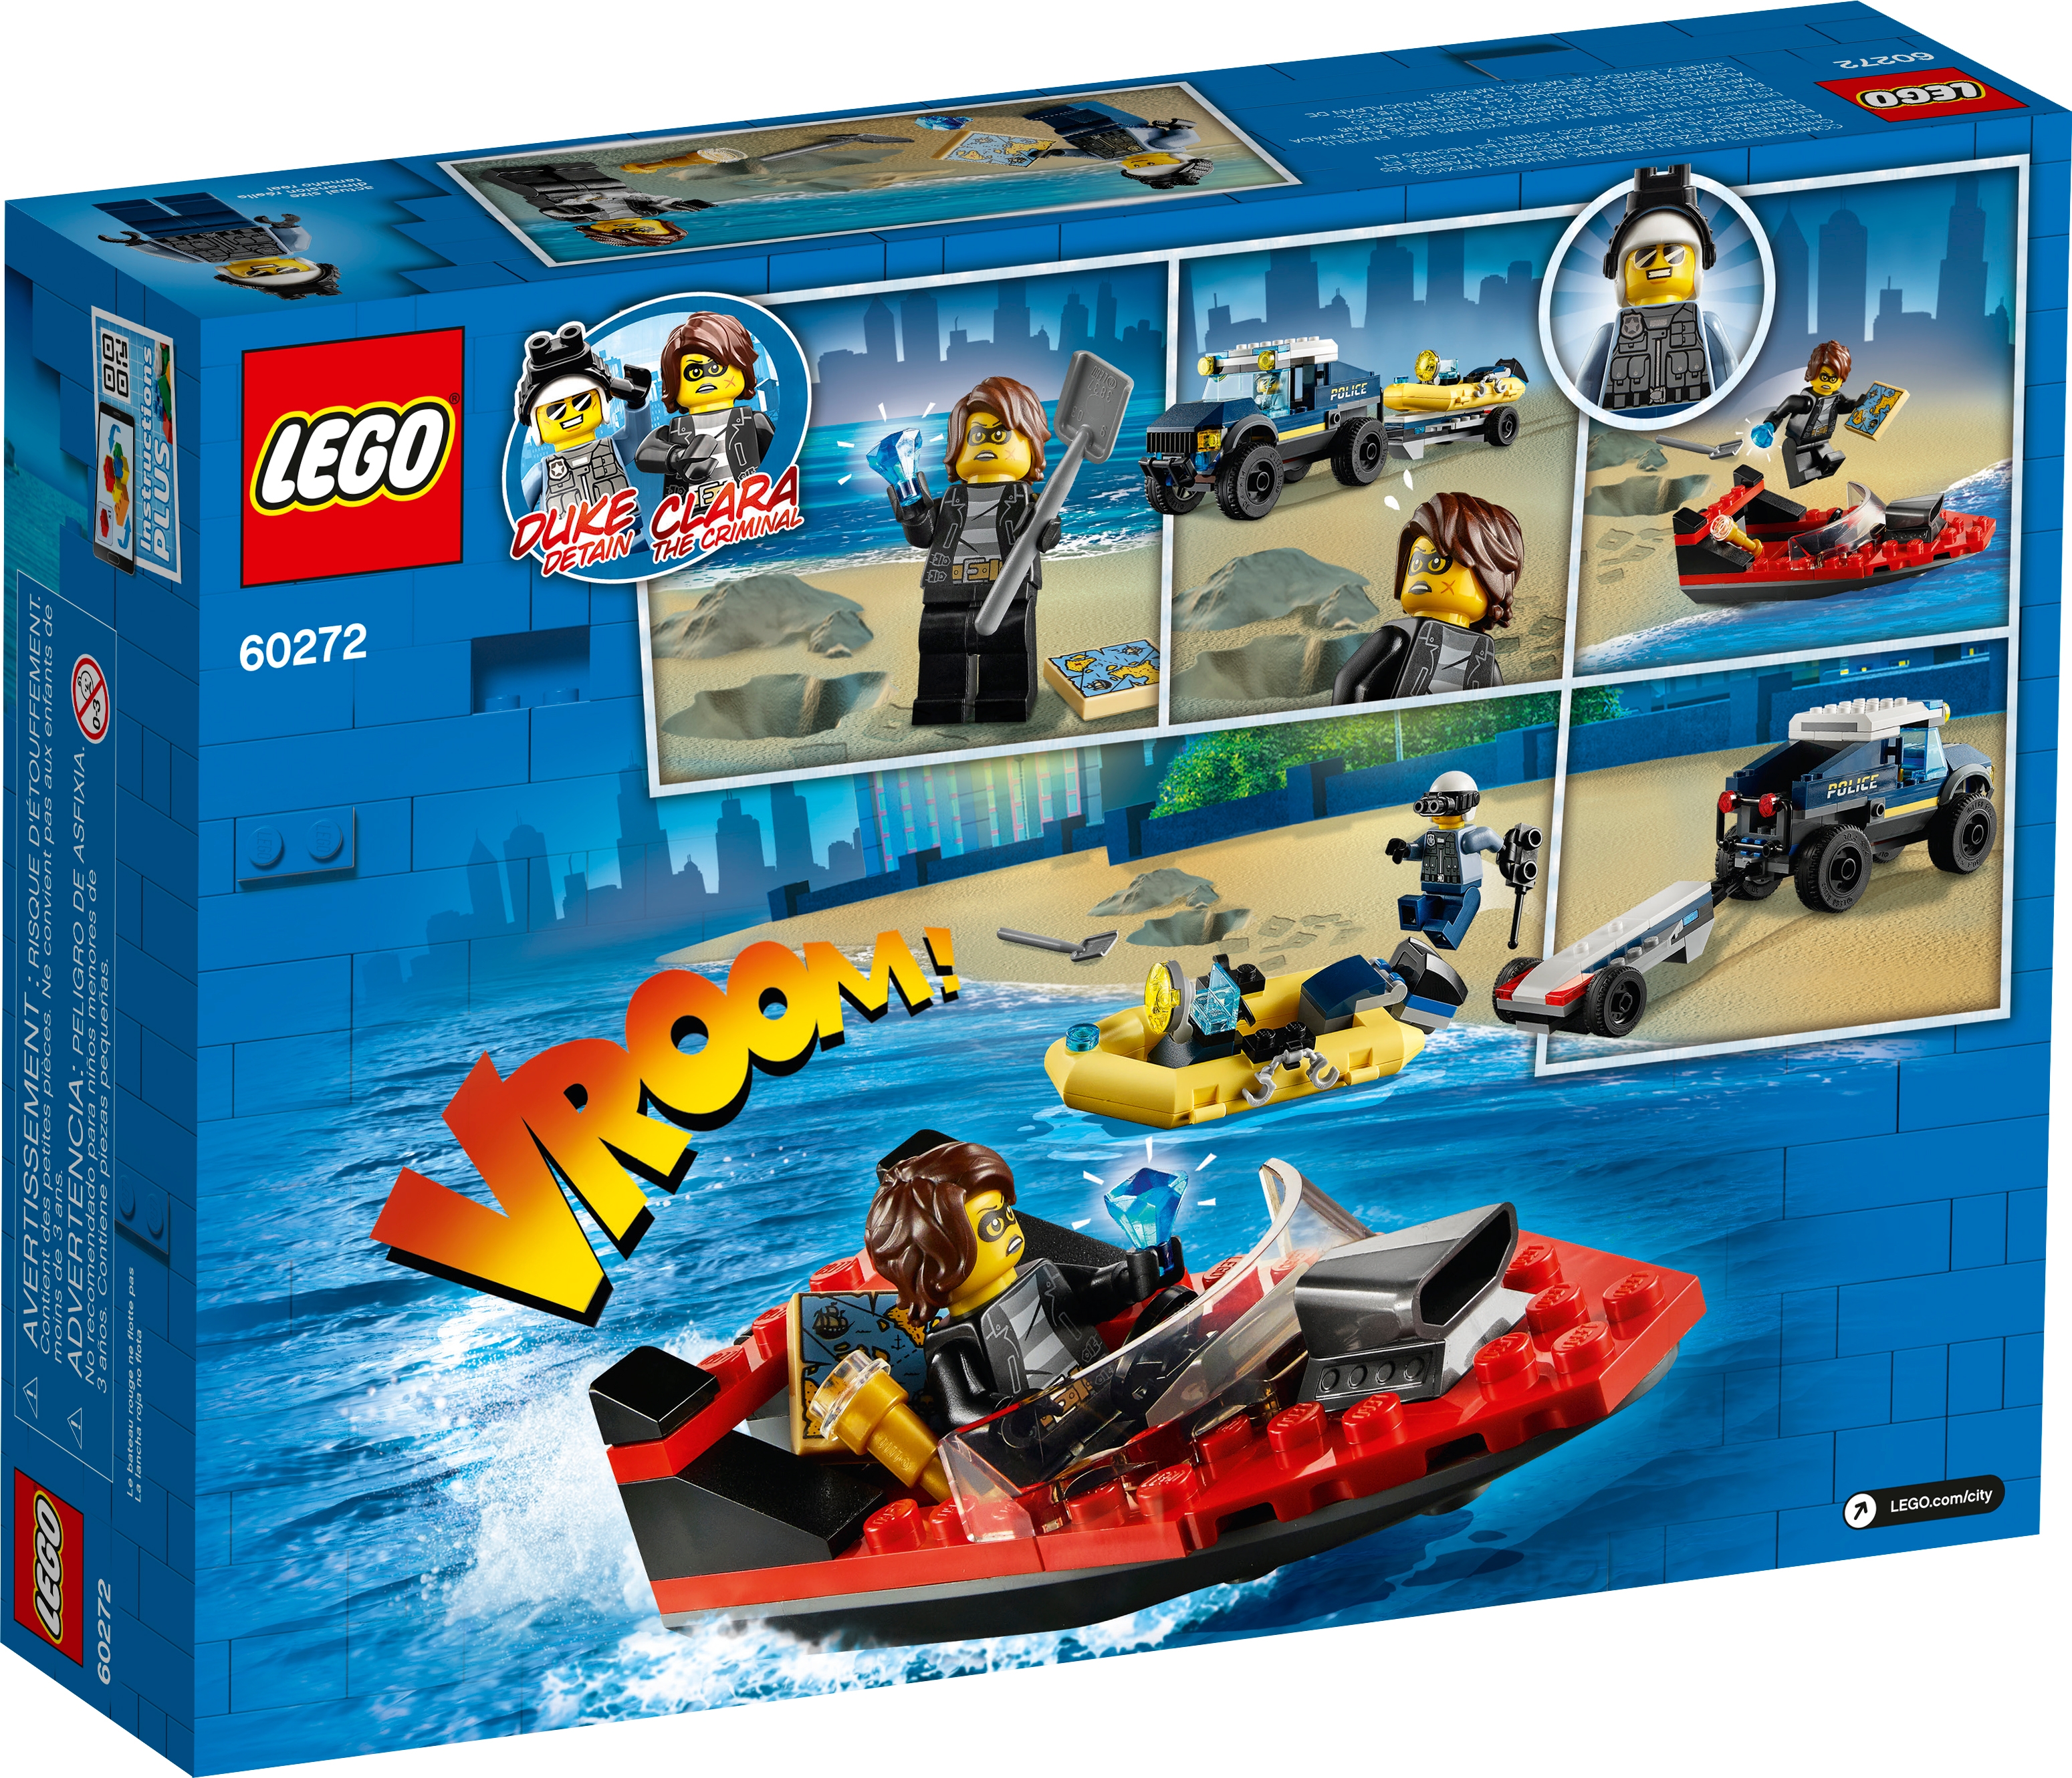 LEGO CITY SETS X 2 POLICE ATV VEHICLE POLICE WATERCRAFT WITH 3 MINIFIGURES 